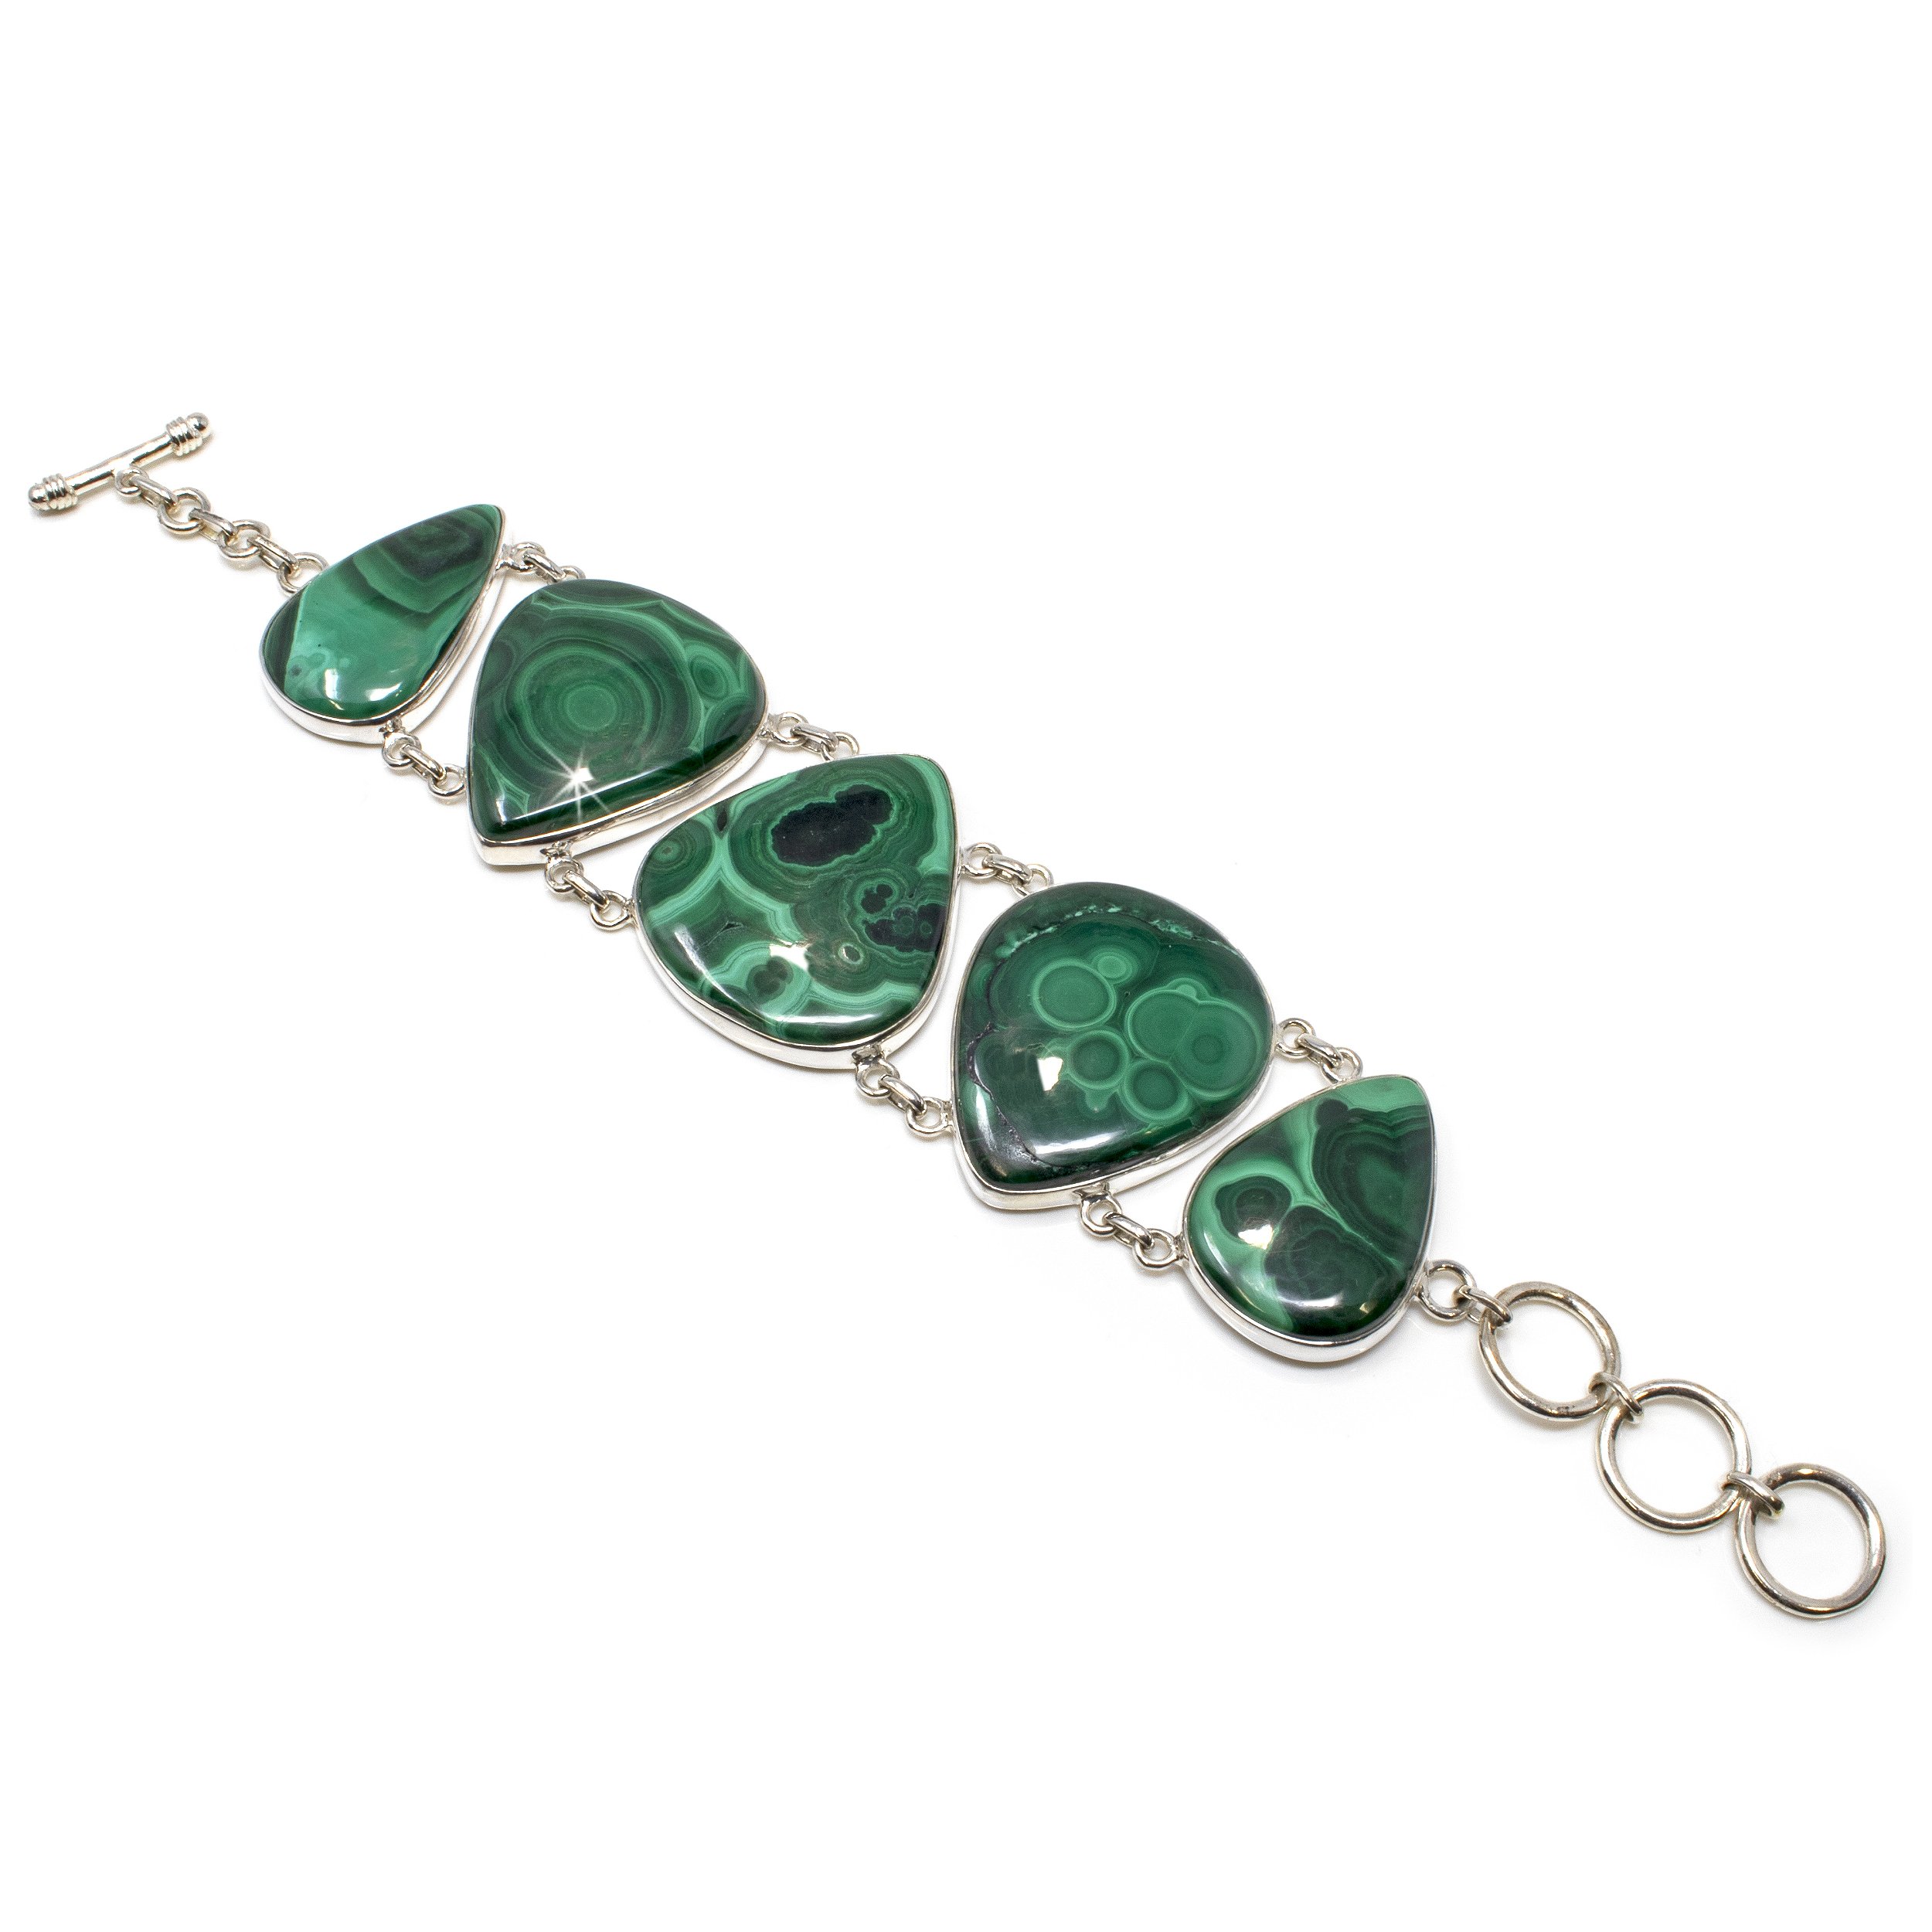 Malachite Link Bracelet - 5 Pear Cabochons With Simple Silver Bezels & Toggle Clasp